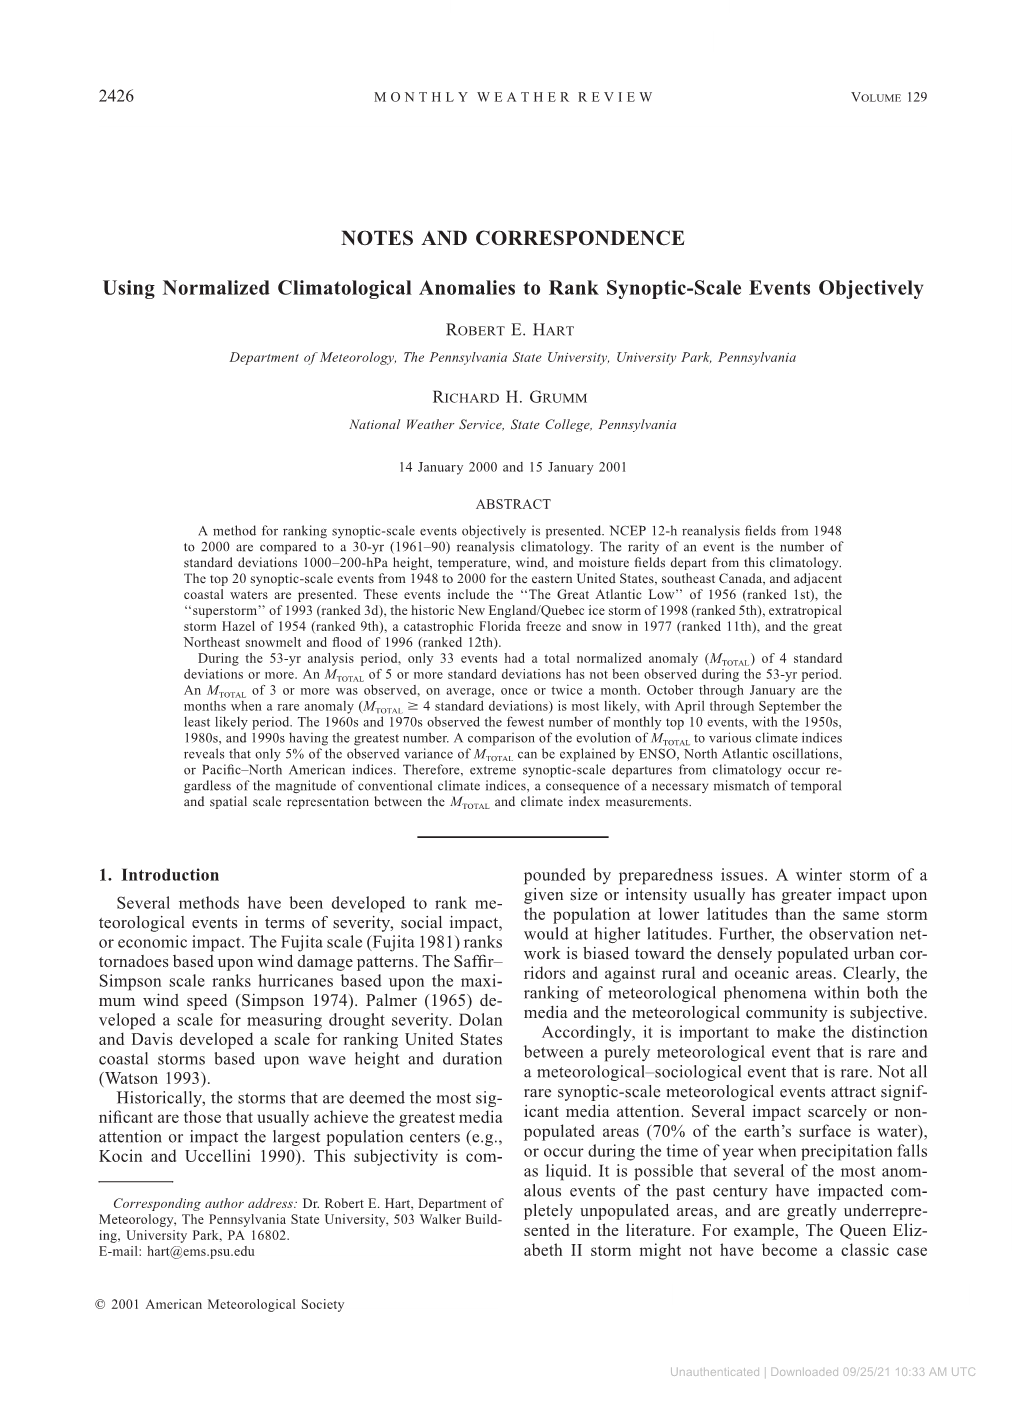 NOTES and CORRESPONDENCE Using Normalized Climatological